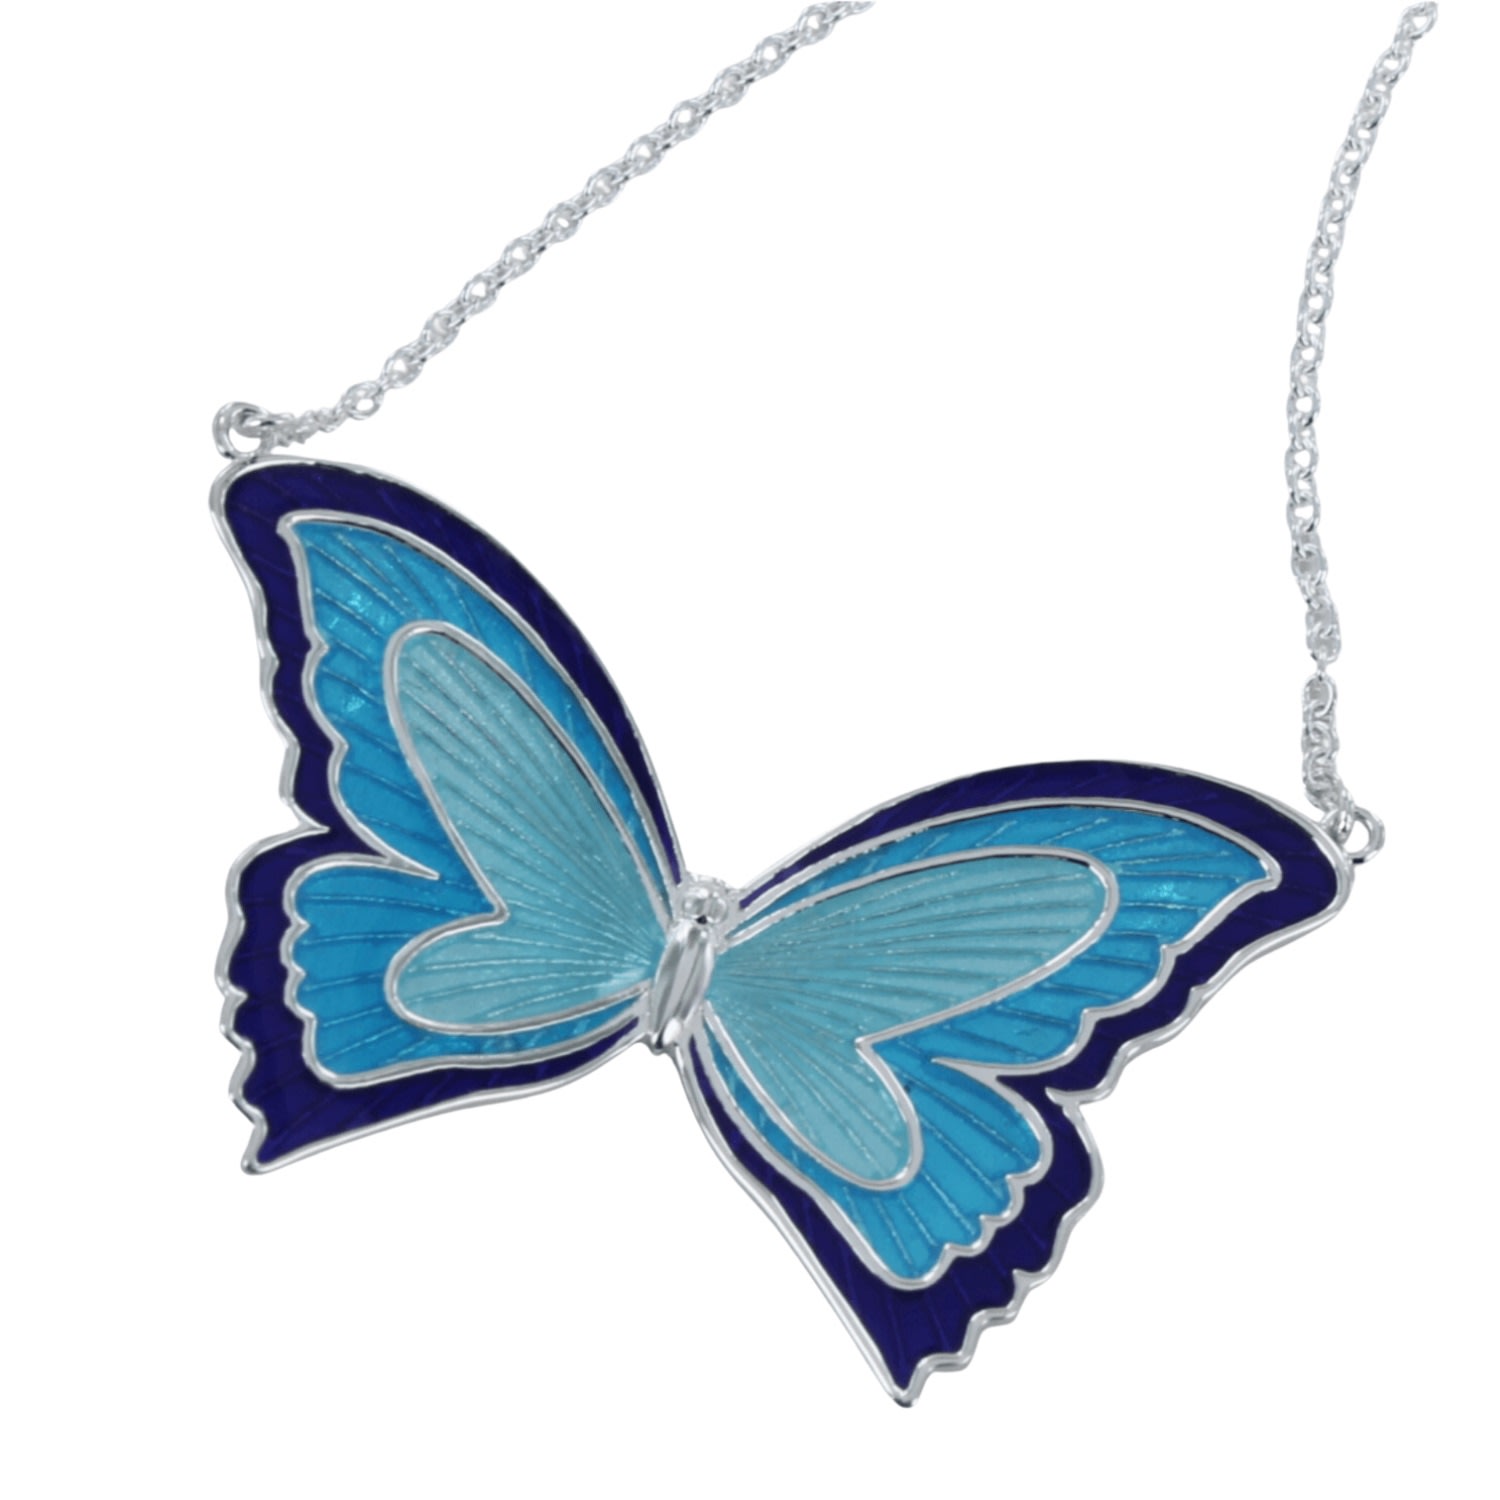 Reeves & Reeves Women's Silver / Blue Large Enamel Butterfly Necklace